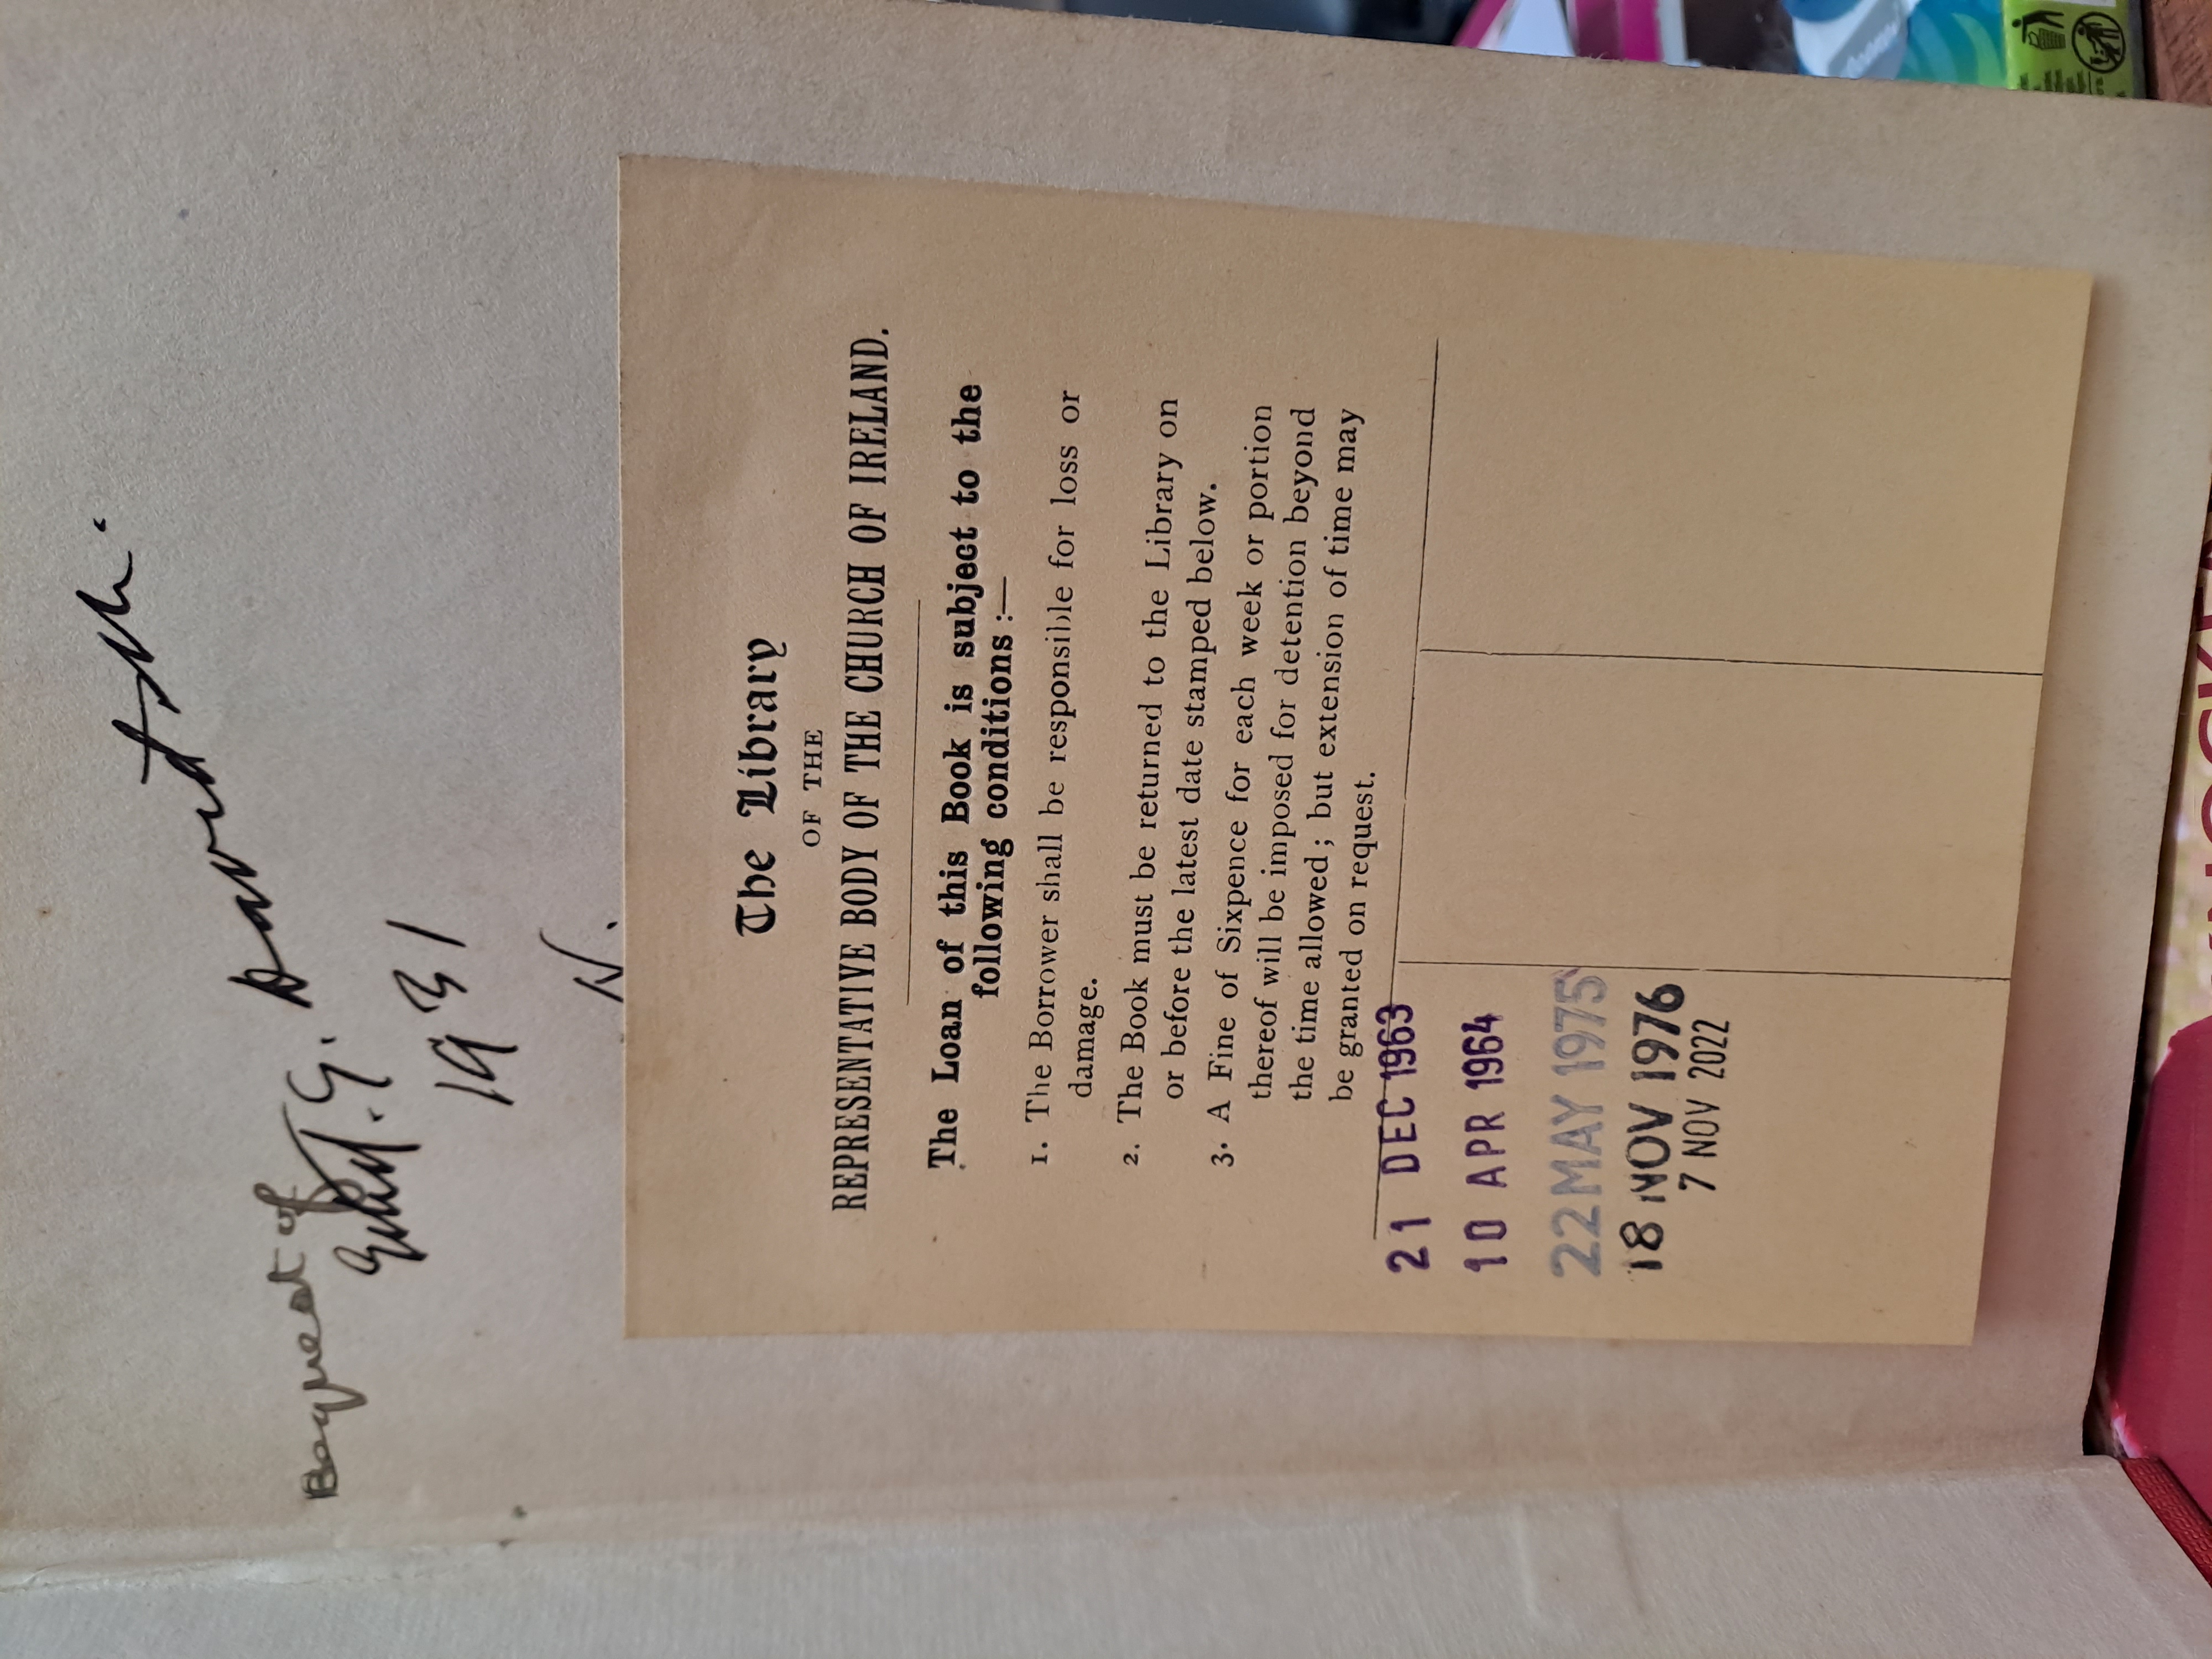 An example of a book marked as a bequest of Ethel G. Davidson (née Goddard). These items will often note when the book was accessioned to the Library, allowing staff to gain an understanding of how the collection grew.